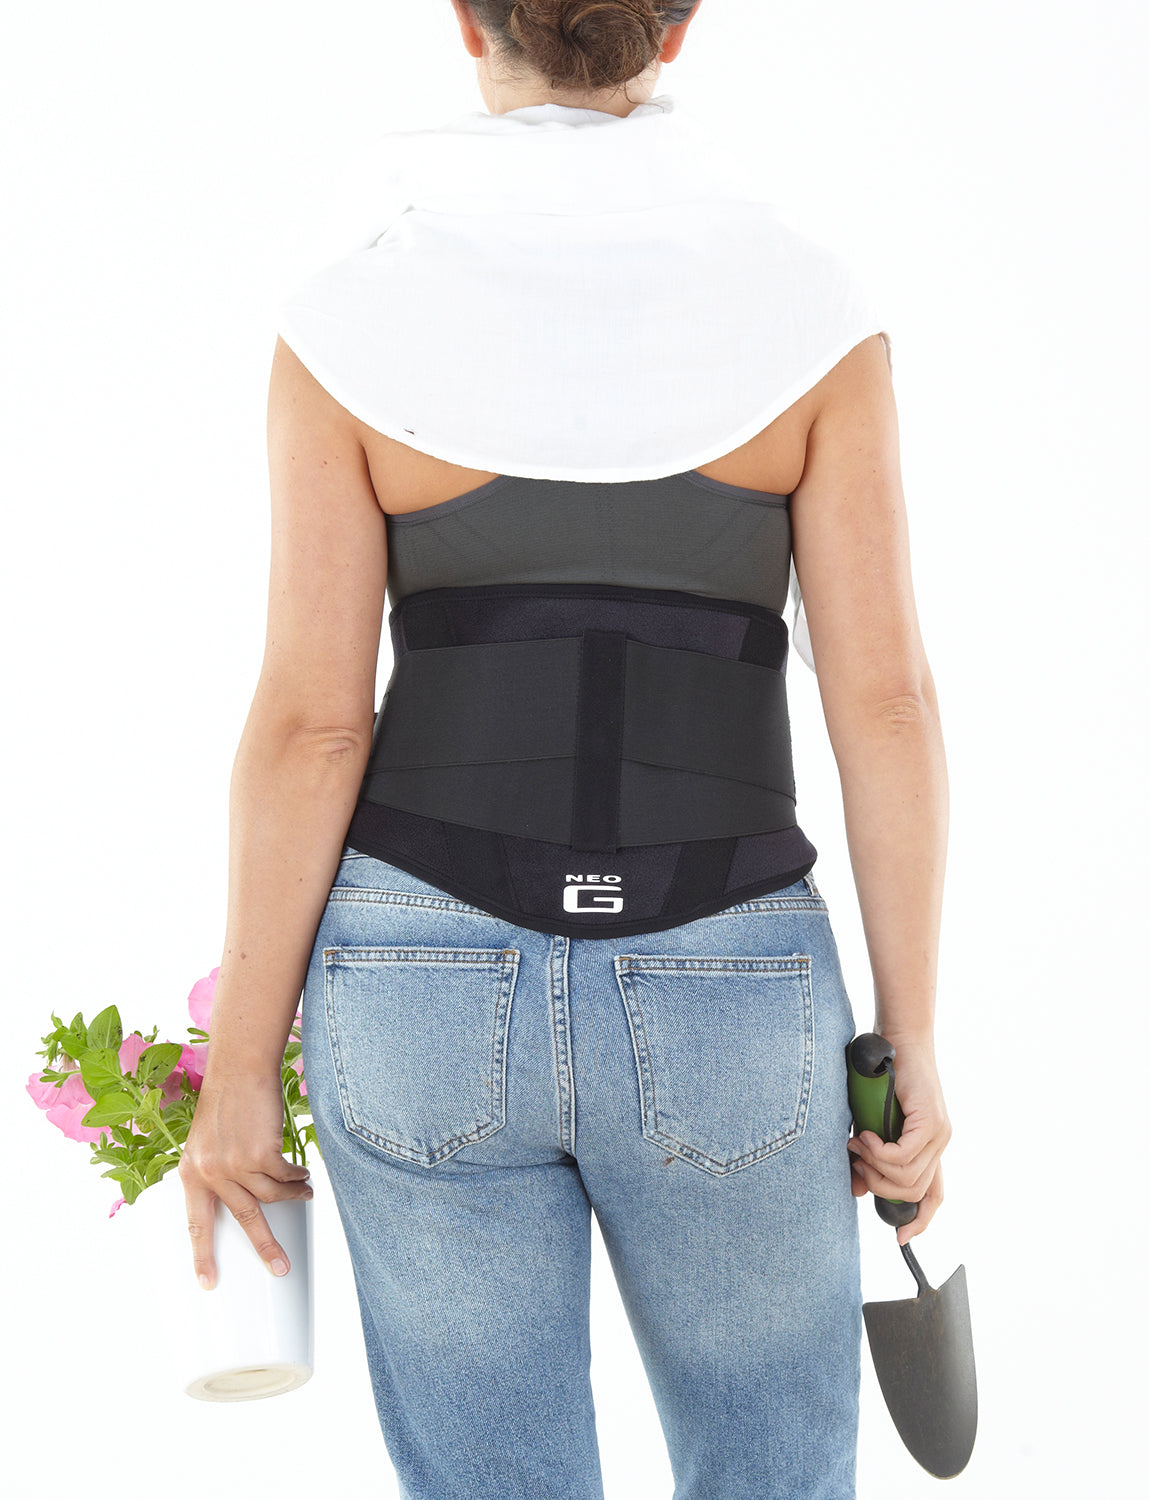 Buy NEO G Back Brace with Power Straps - One Size